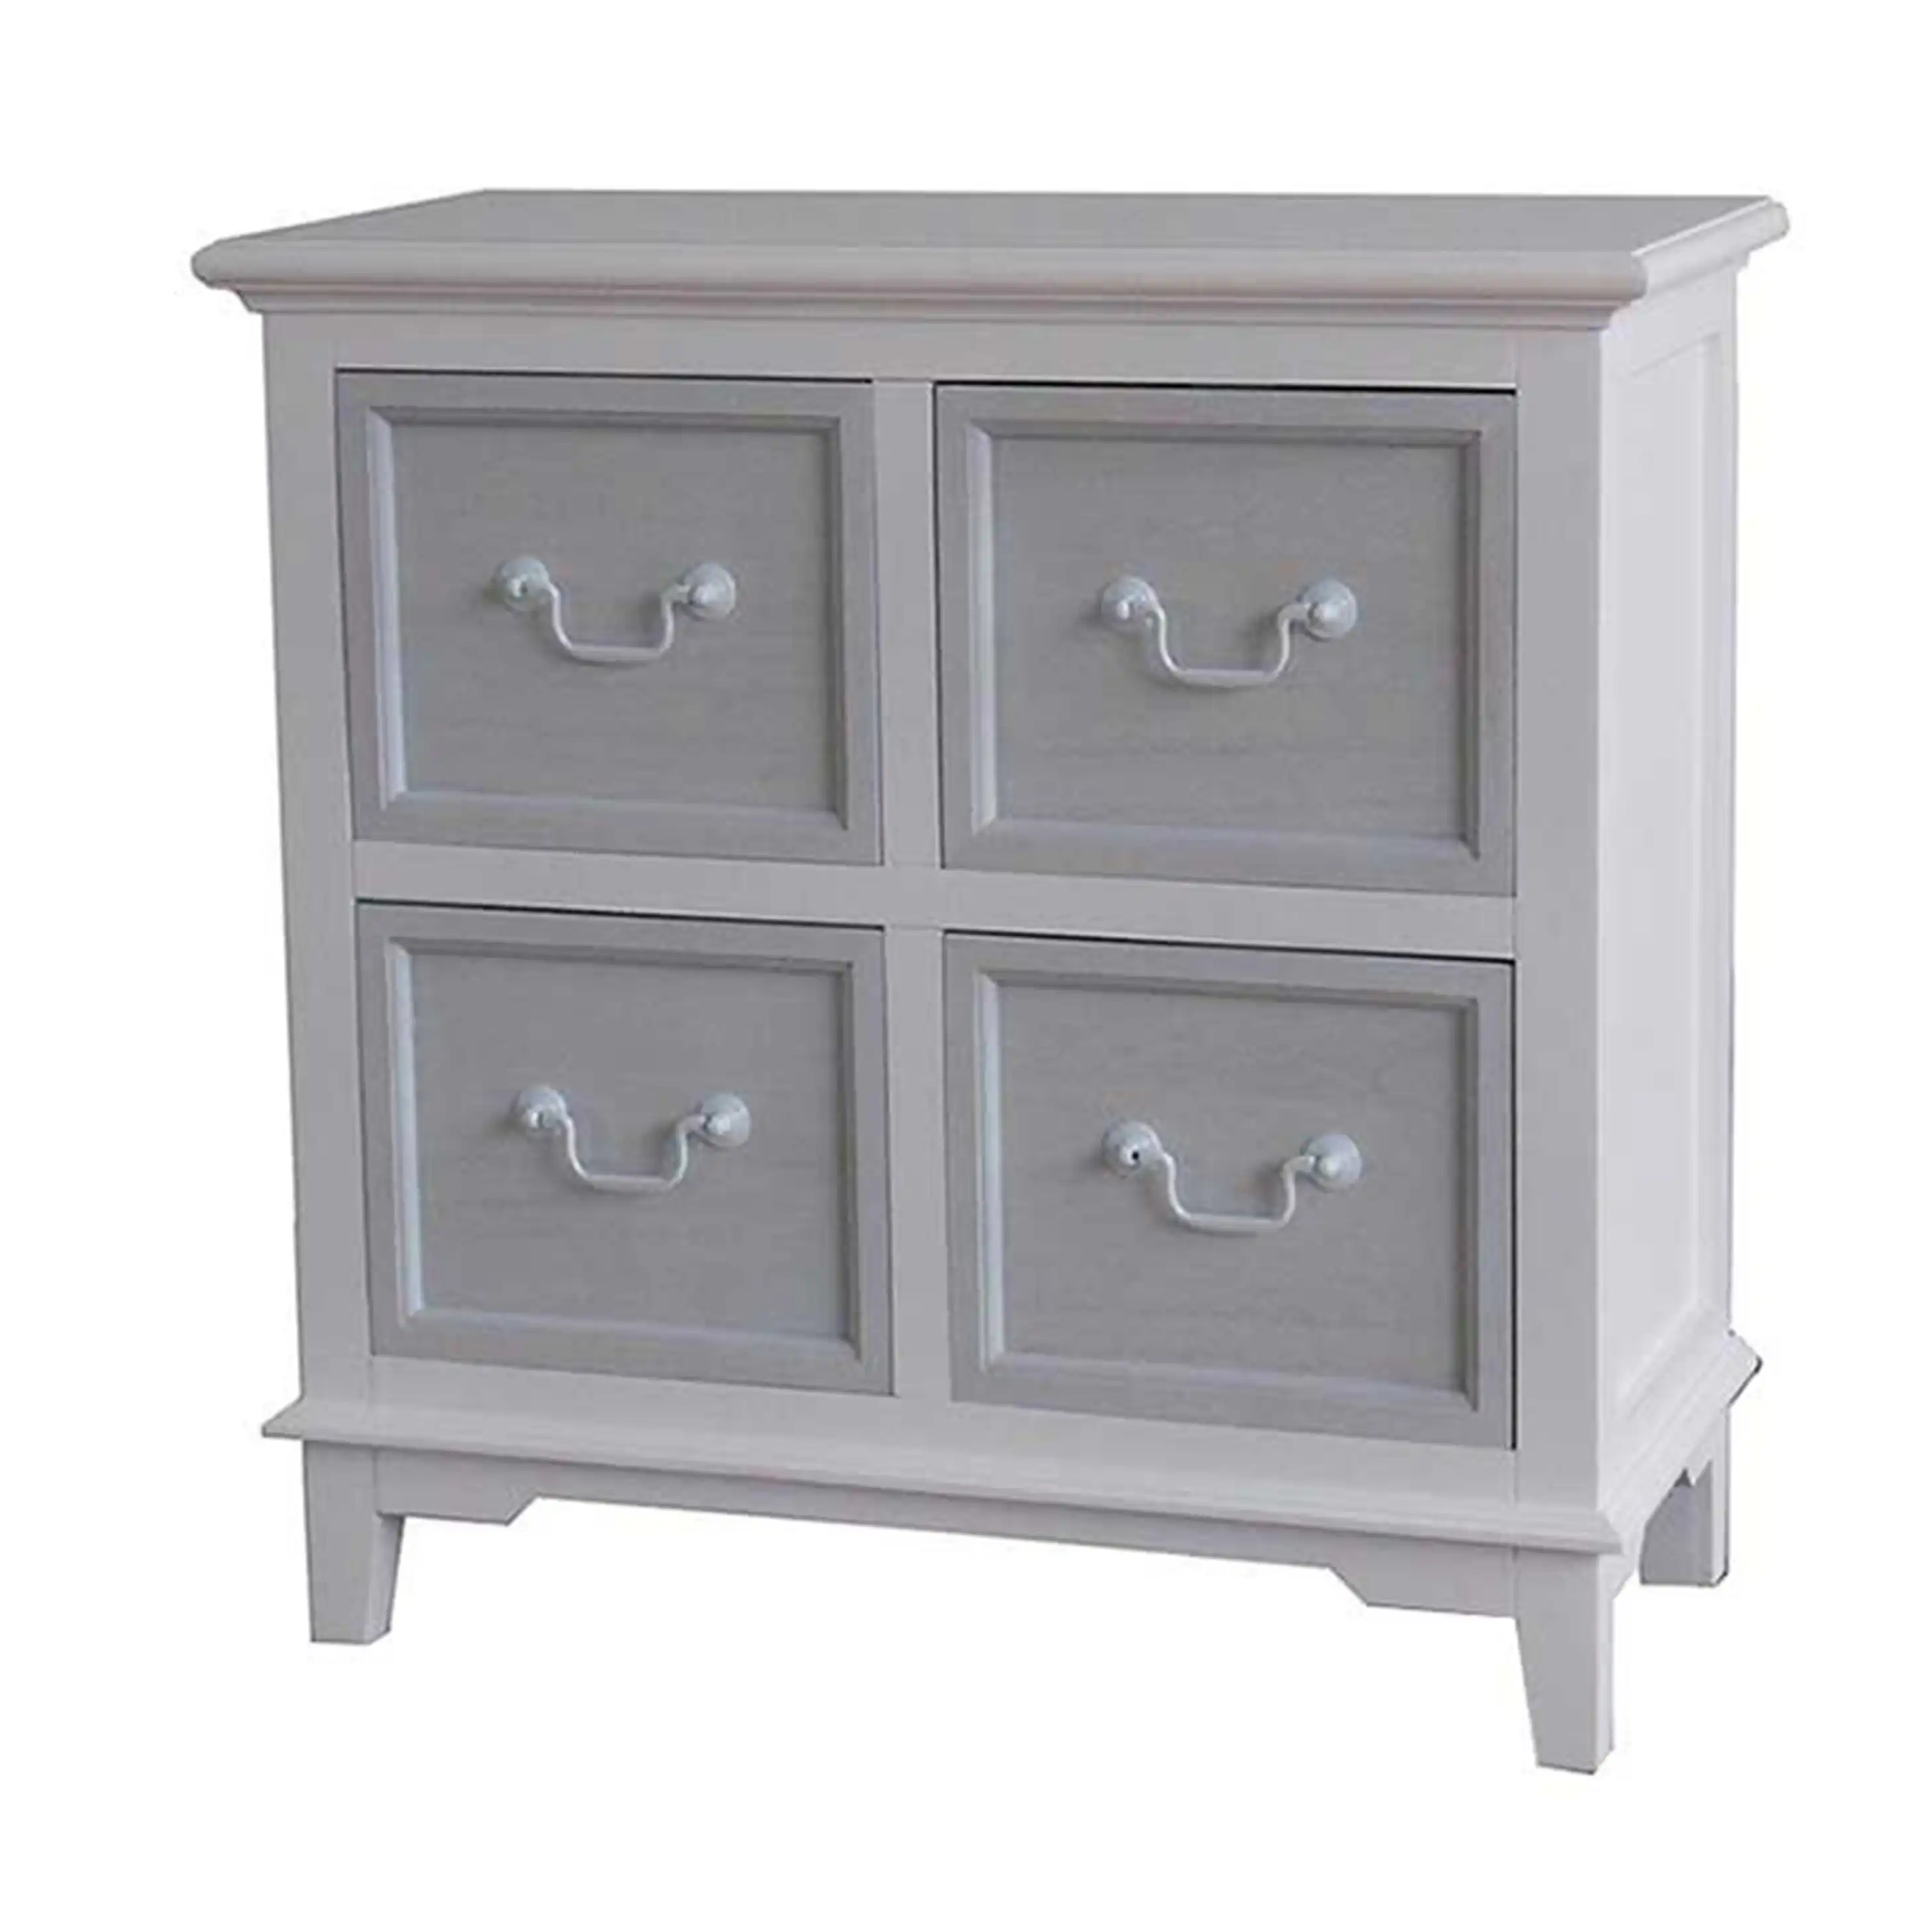 Cabinet with 4 drawers - popular handicrafts